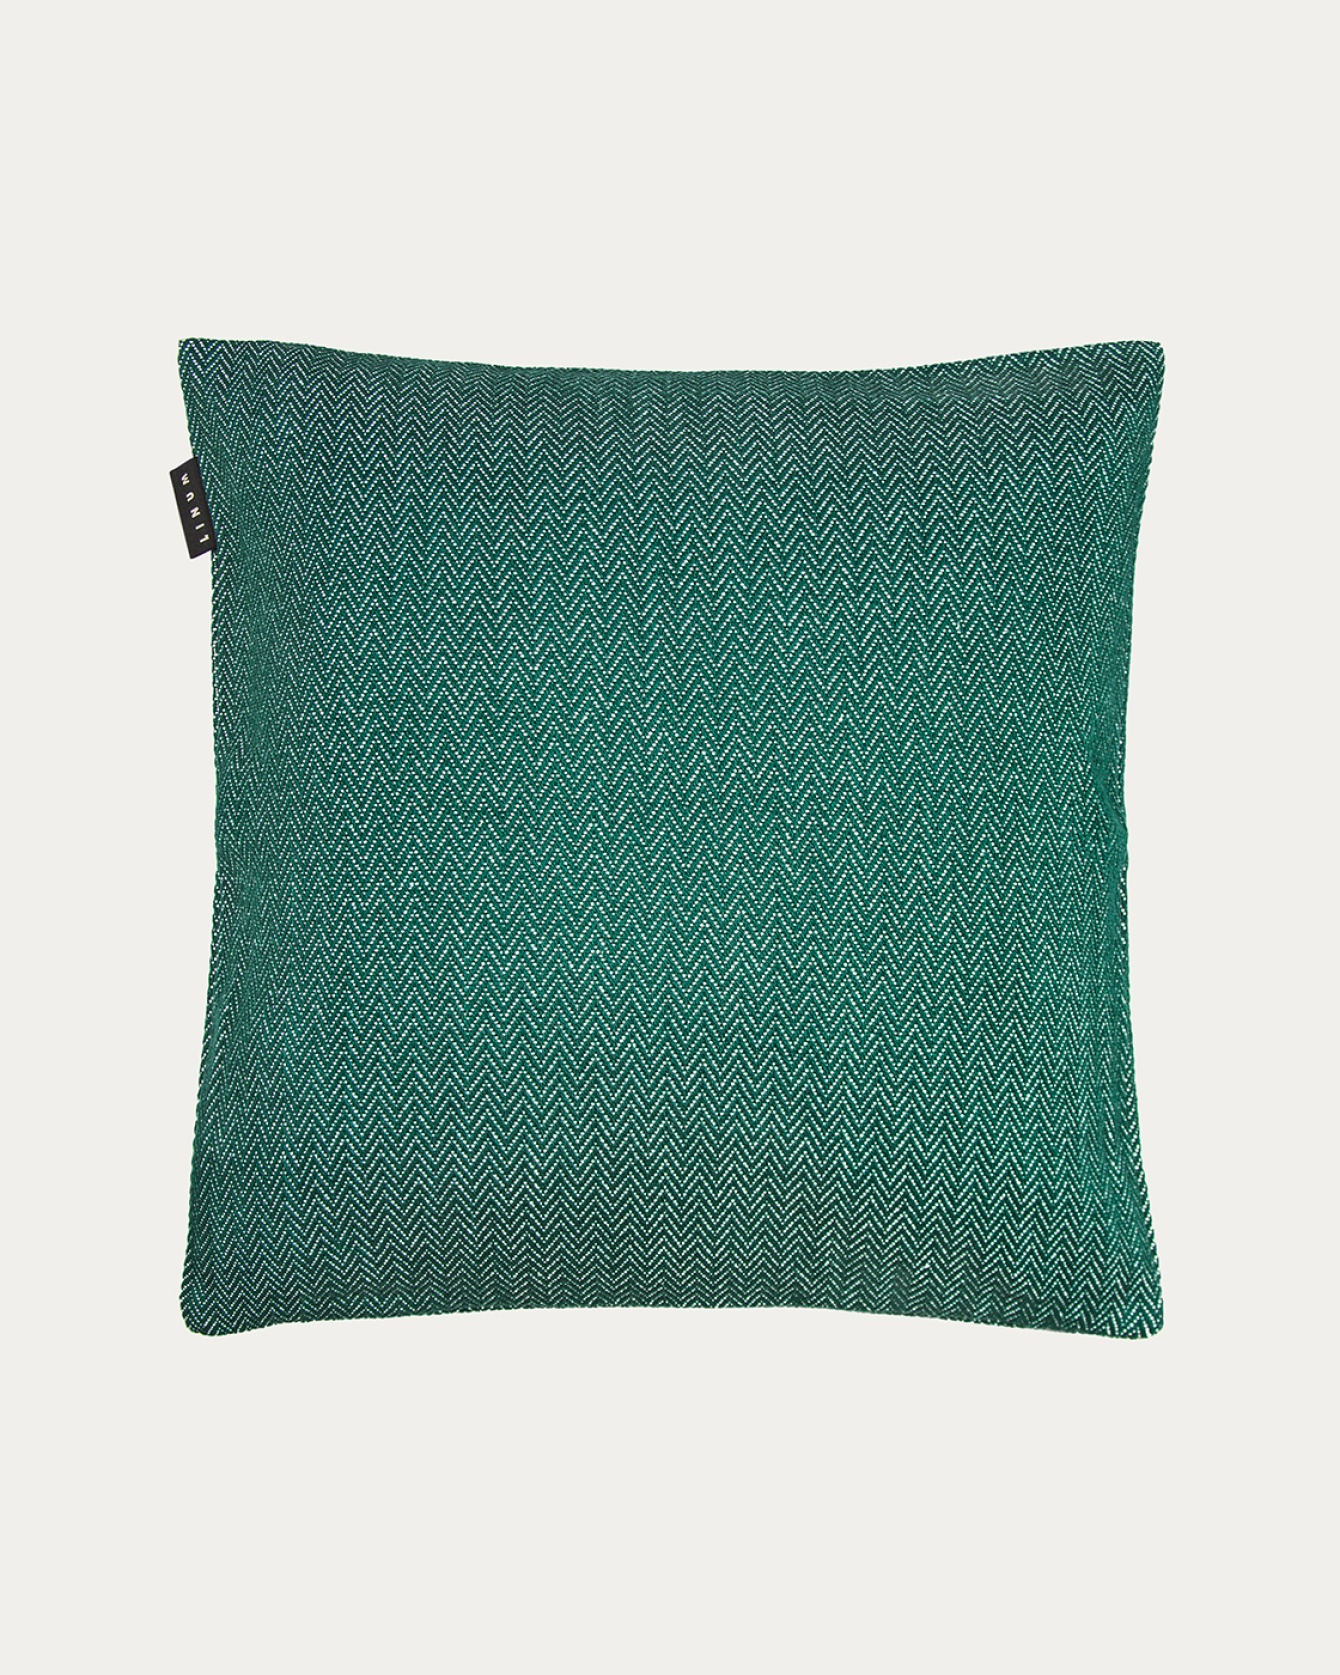 Product image deep emerald green SHEPARD cushion cover made of soft cotton with a discreet herringbone pattern from LINUM DESIGN. Size 50x50 cm.